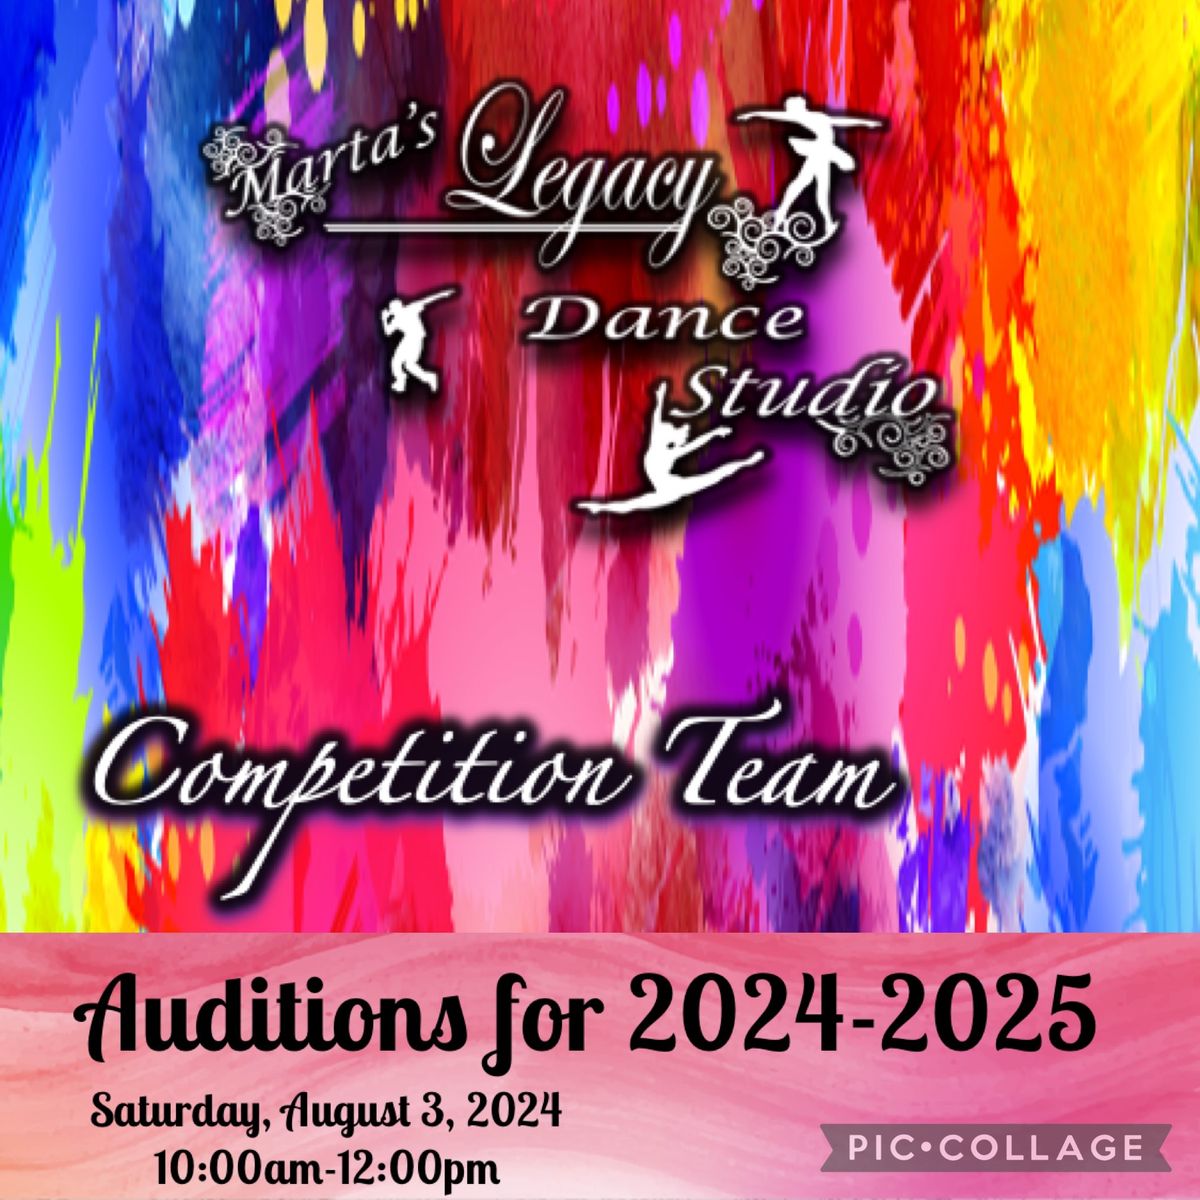 AUDITIONS - 2024-2025 Group competition team